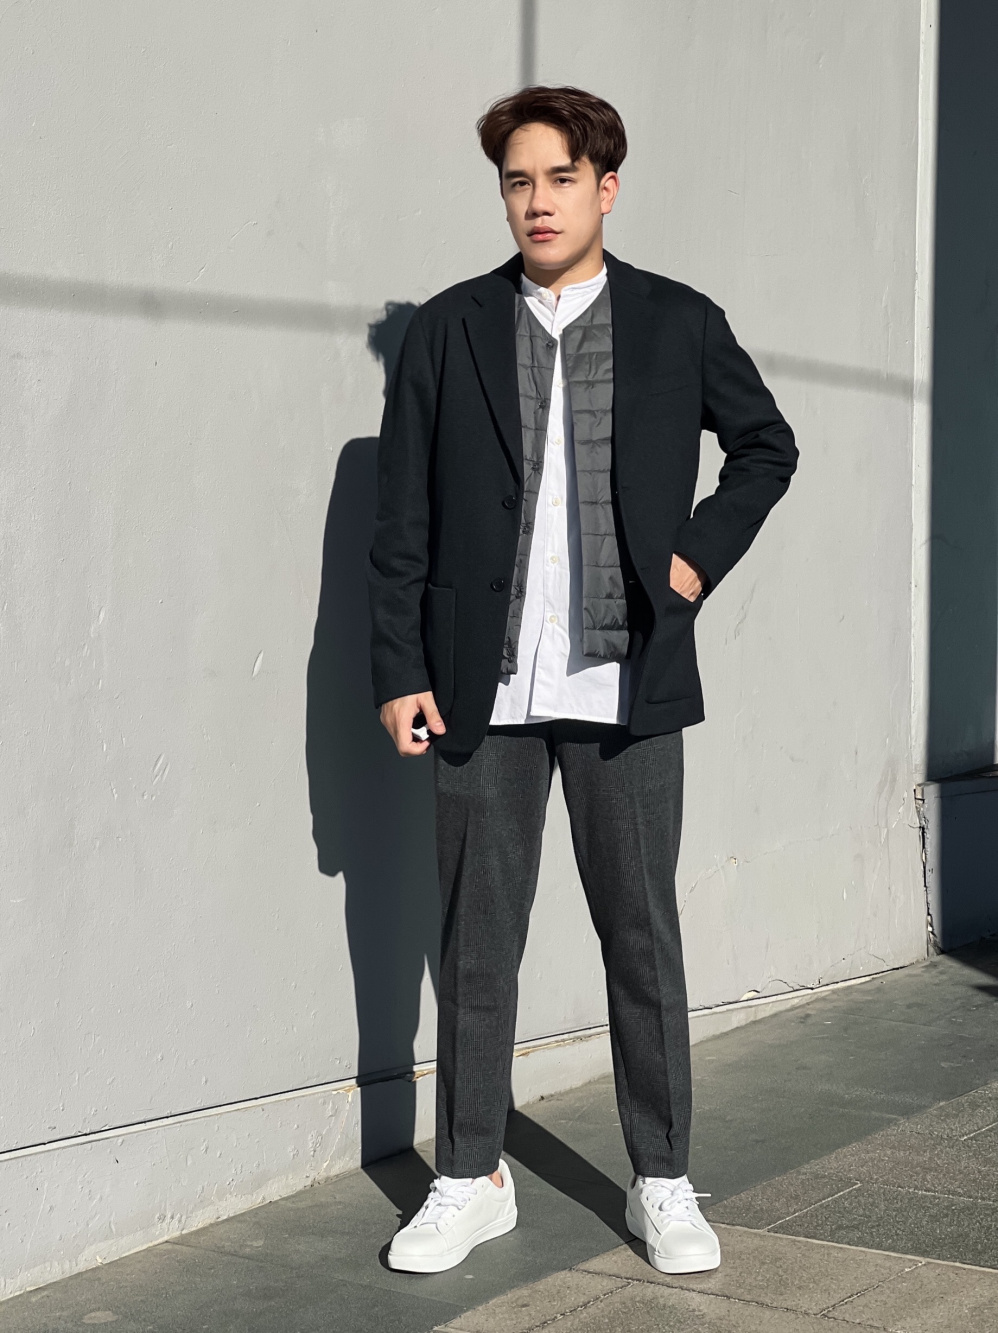 Check styling ideas for「Smart Ankle Pants」